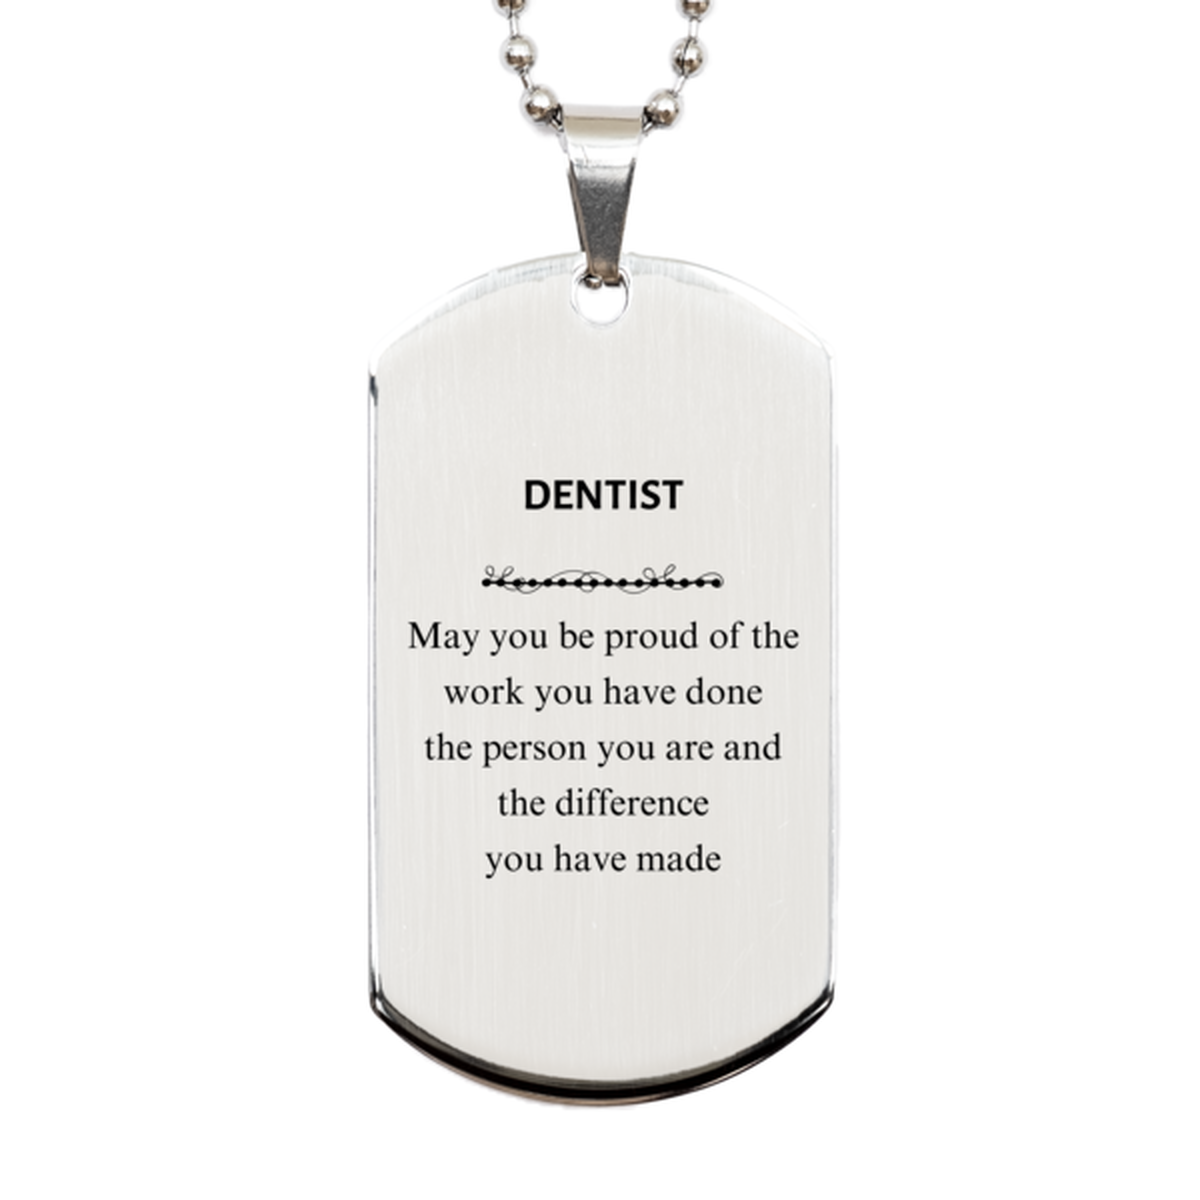 Dentist May you be proud of the work you have done, Retirement Dentist Silver Dog Tag for Colleague Appreciation Gifts Amazing for Dentist